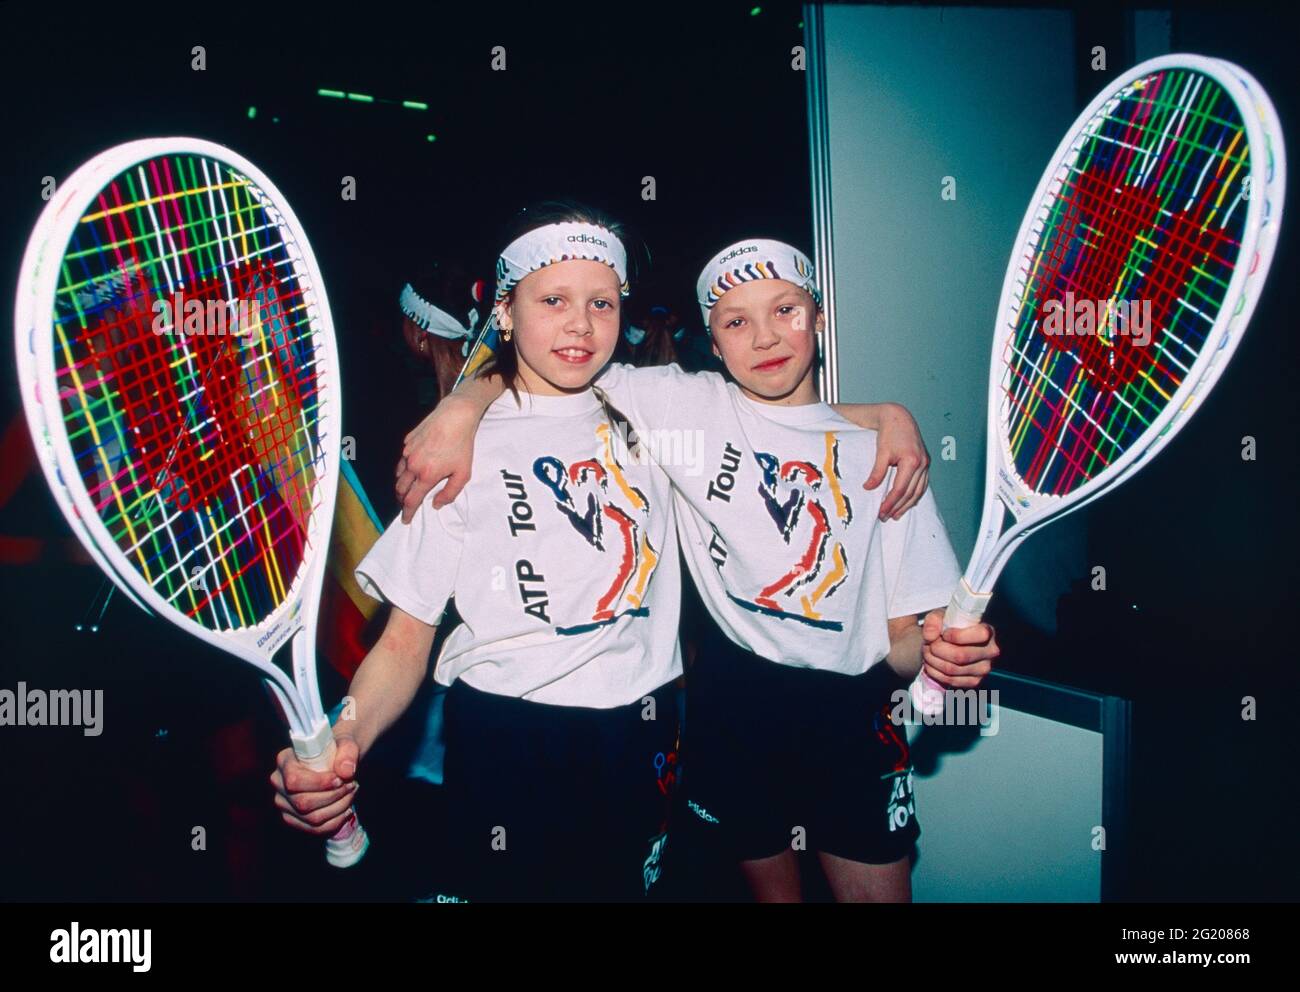 Two girls with large tennis rackets wearing the ATP tour T-shirt, USA 1993 Stock Photo